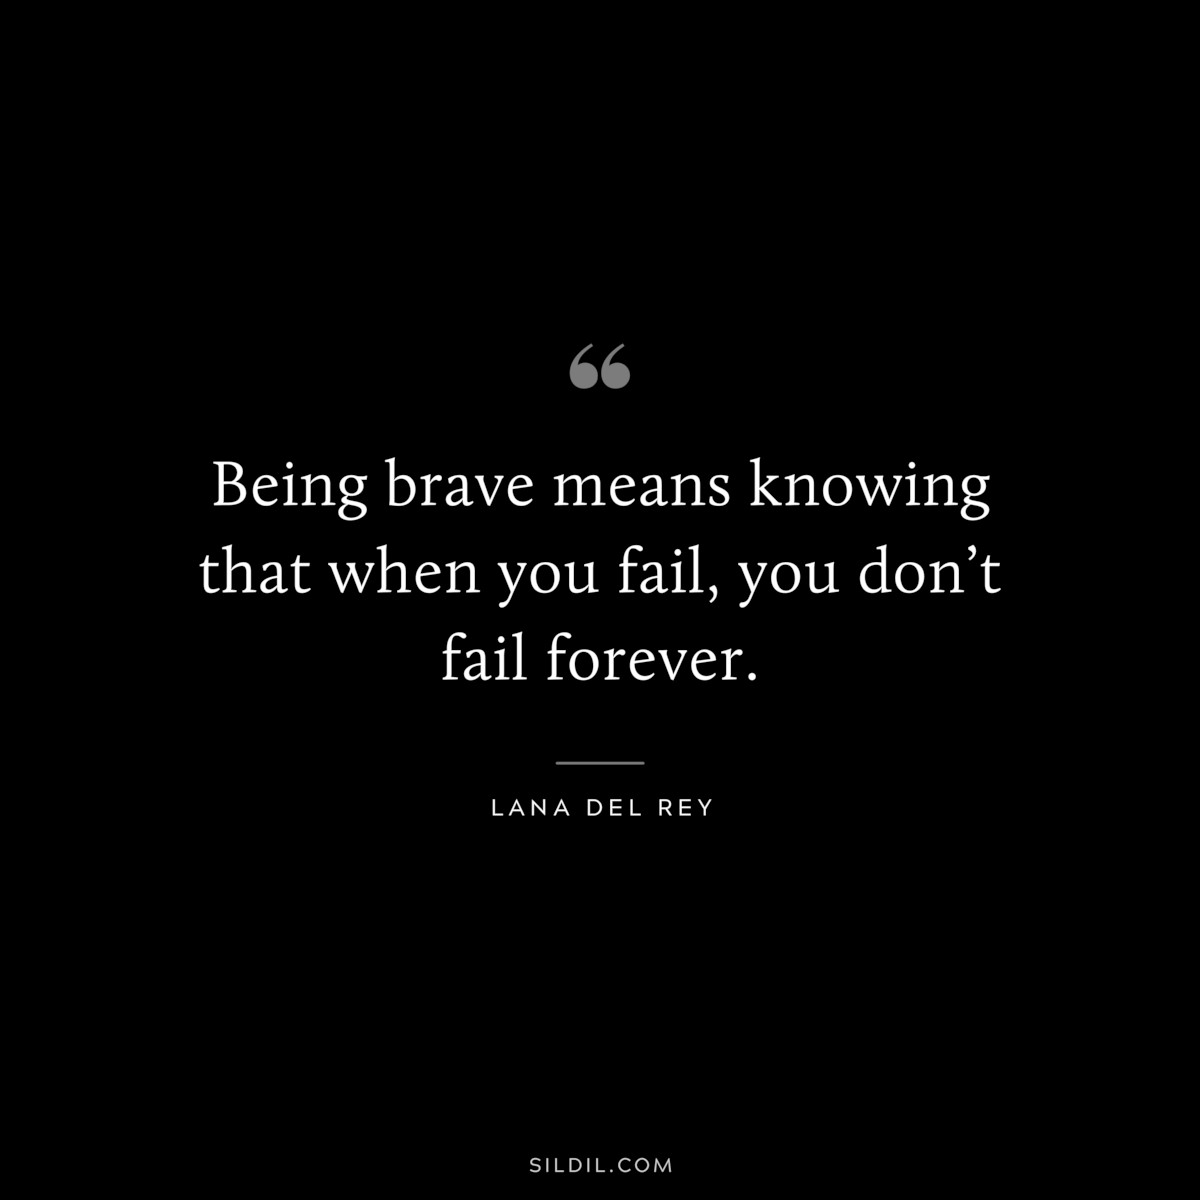 Being brave means knowing that when you fail, you don’t fail forever. ― Lana Del Rey